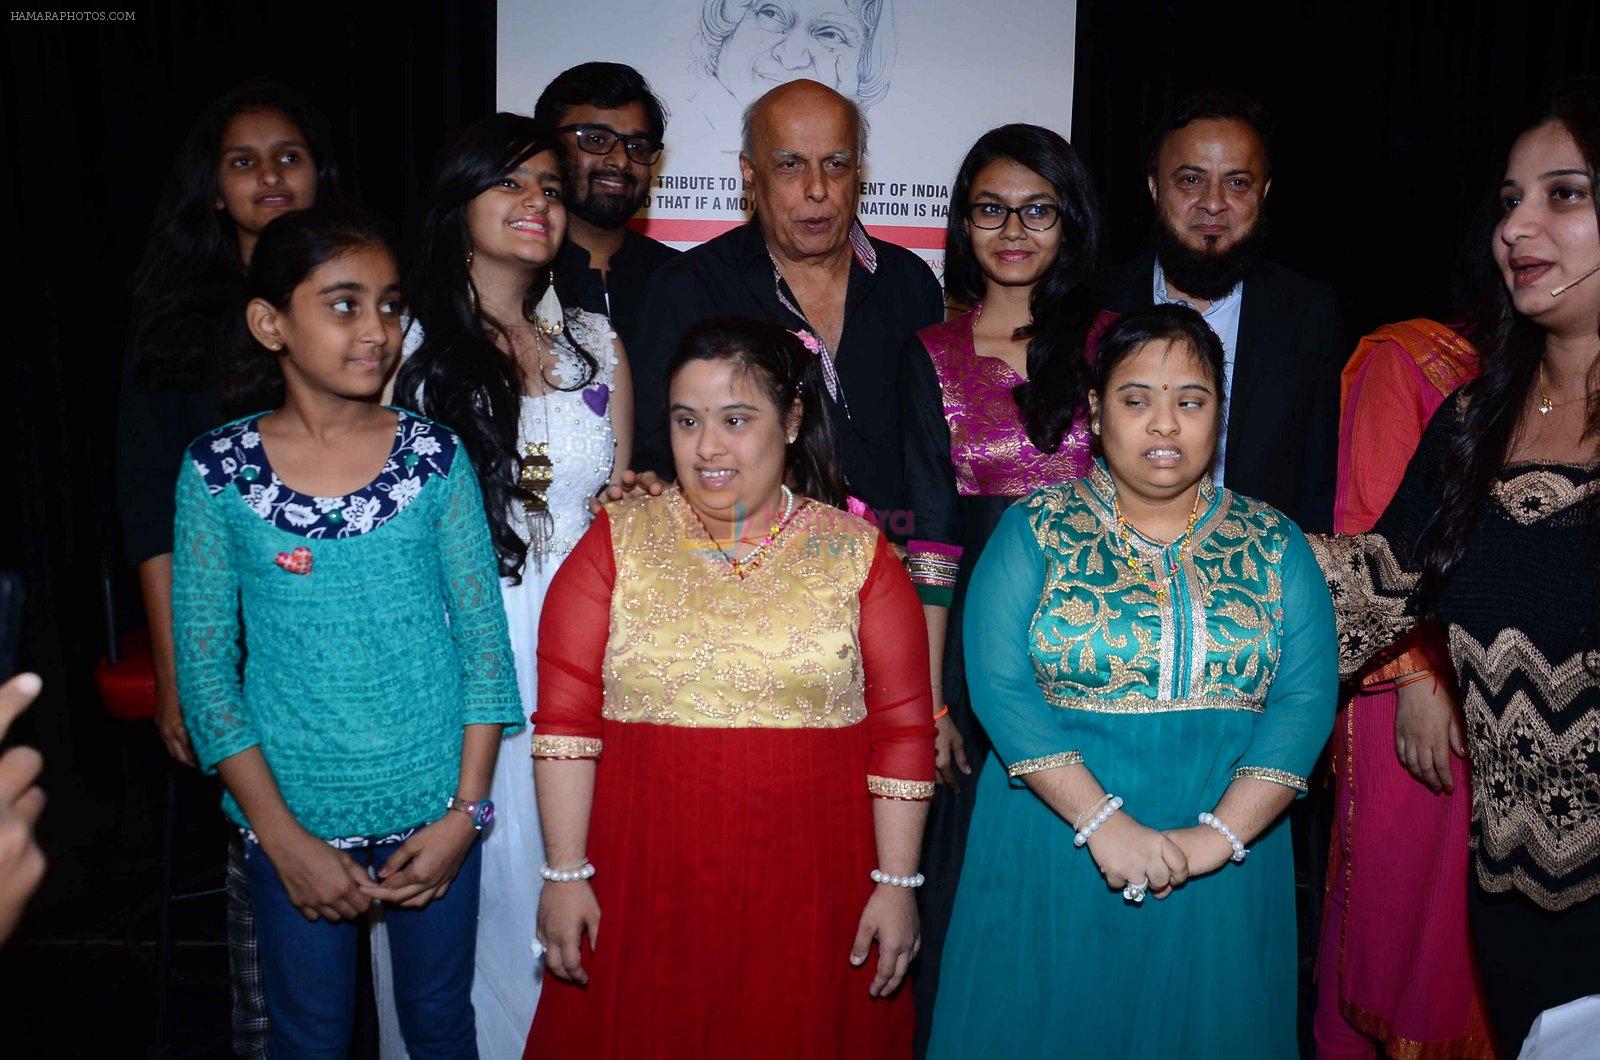 Mahesh Bhatt at the tribute for APJ Abdul Kalam birth anniversary - Make your mother smile, campaign by Yuva on 15th Oct 2015